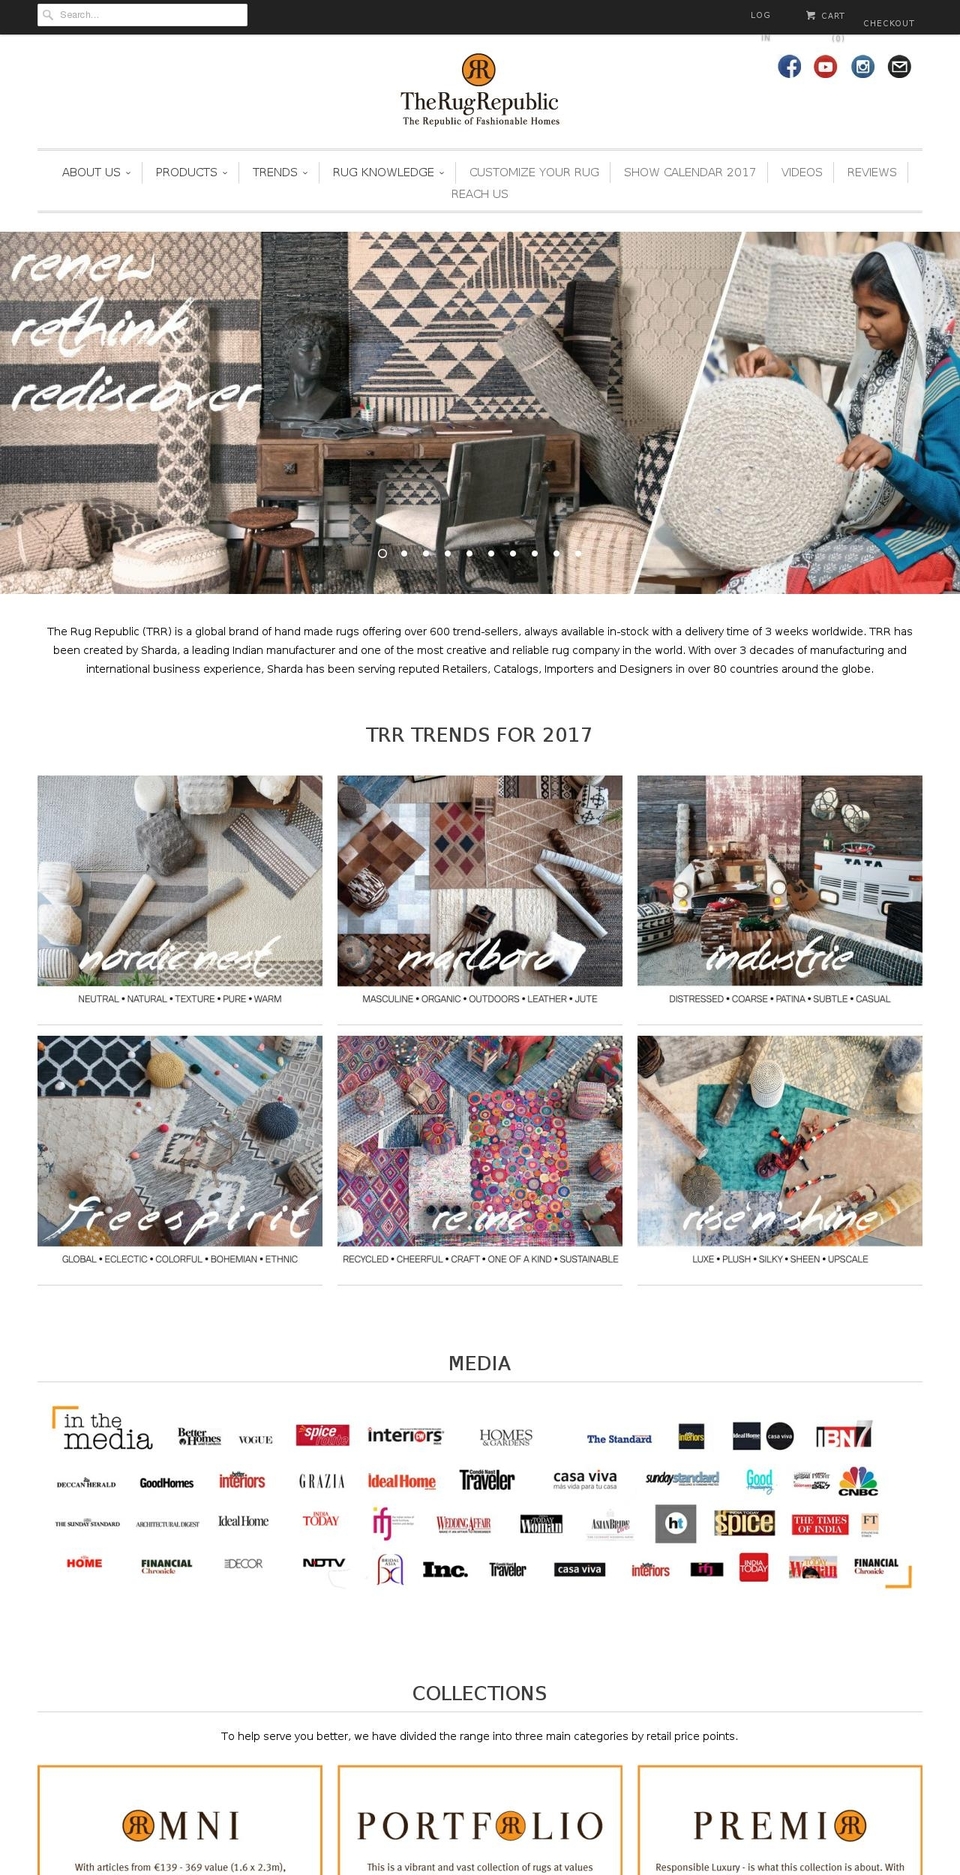 Copy of TRR-Oct- Shopify theme site example therugrepublic.eu